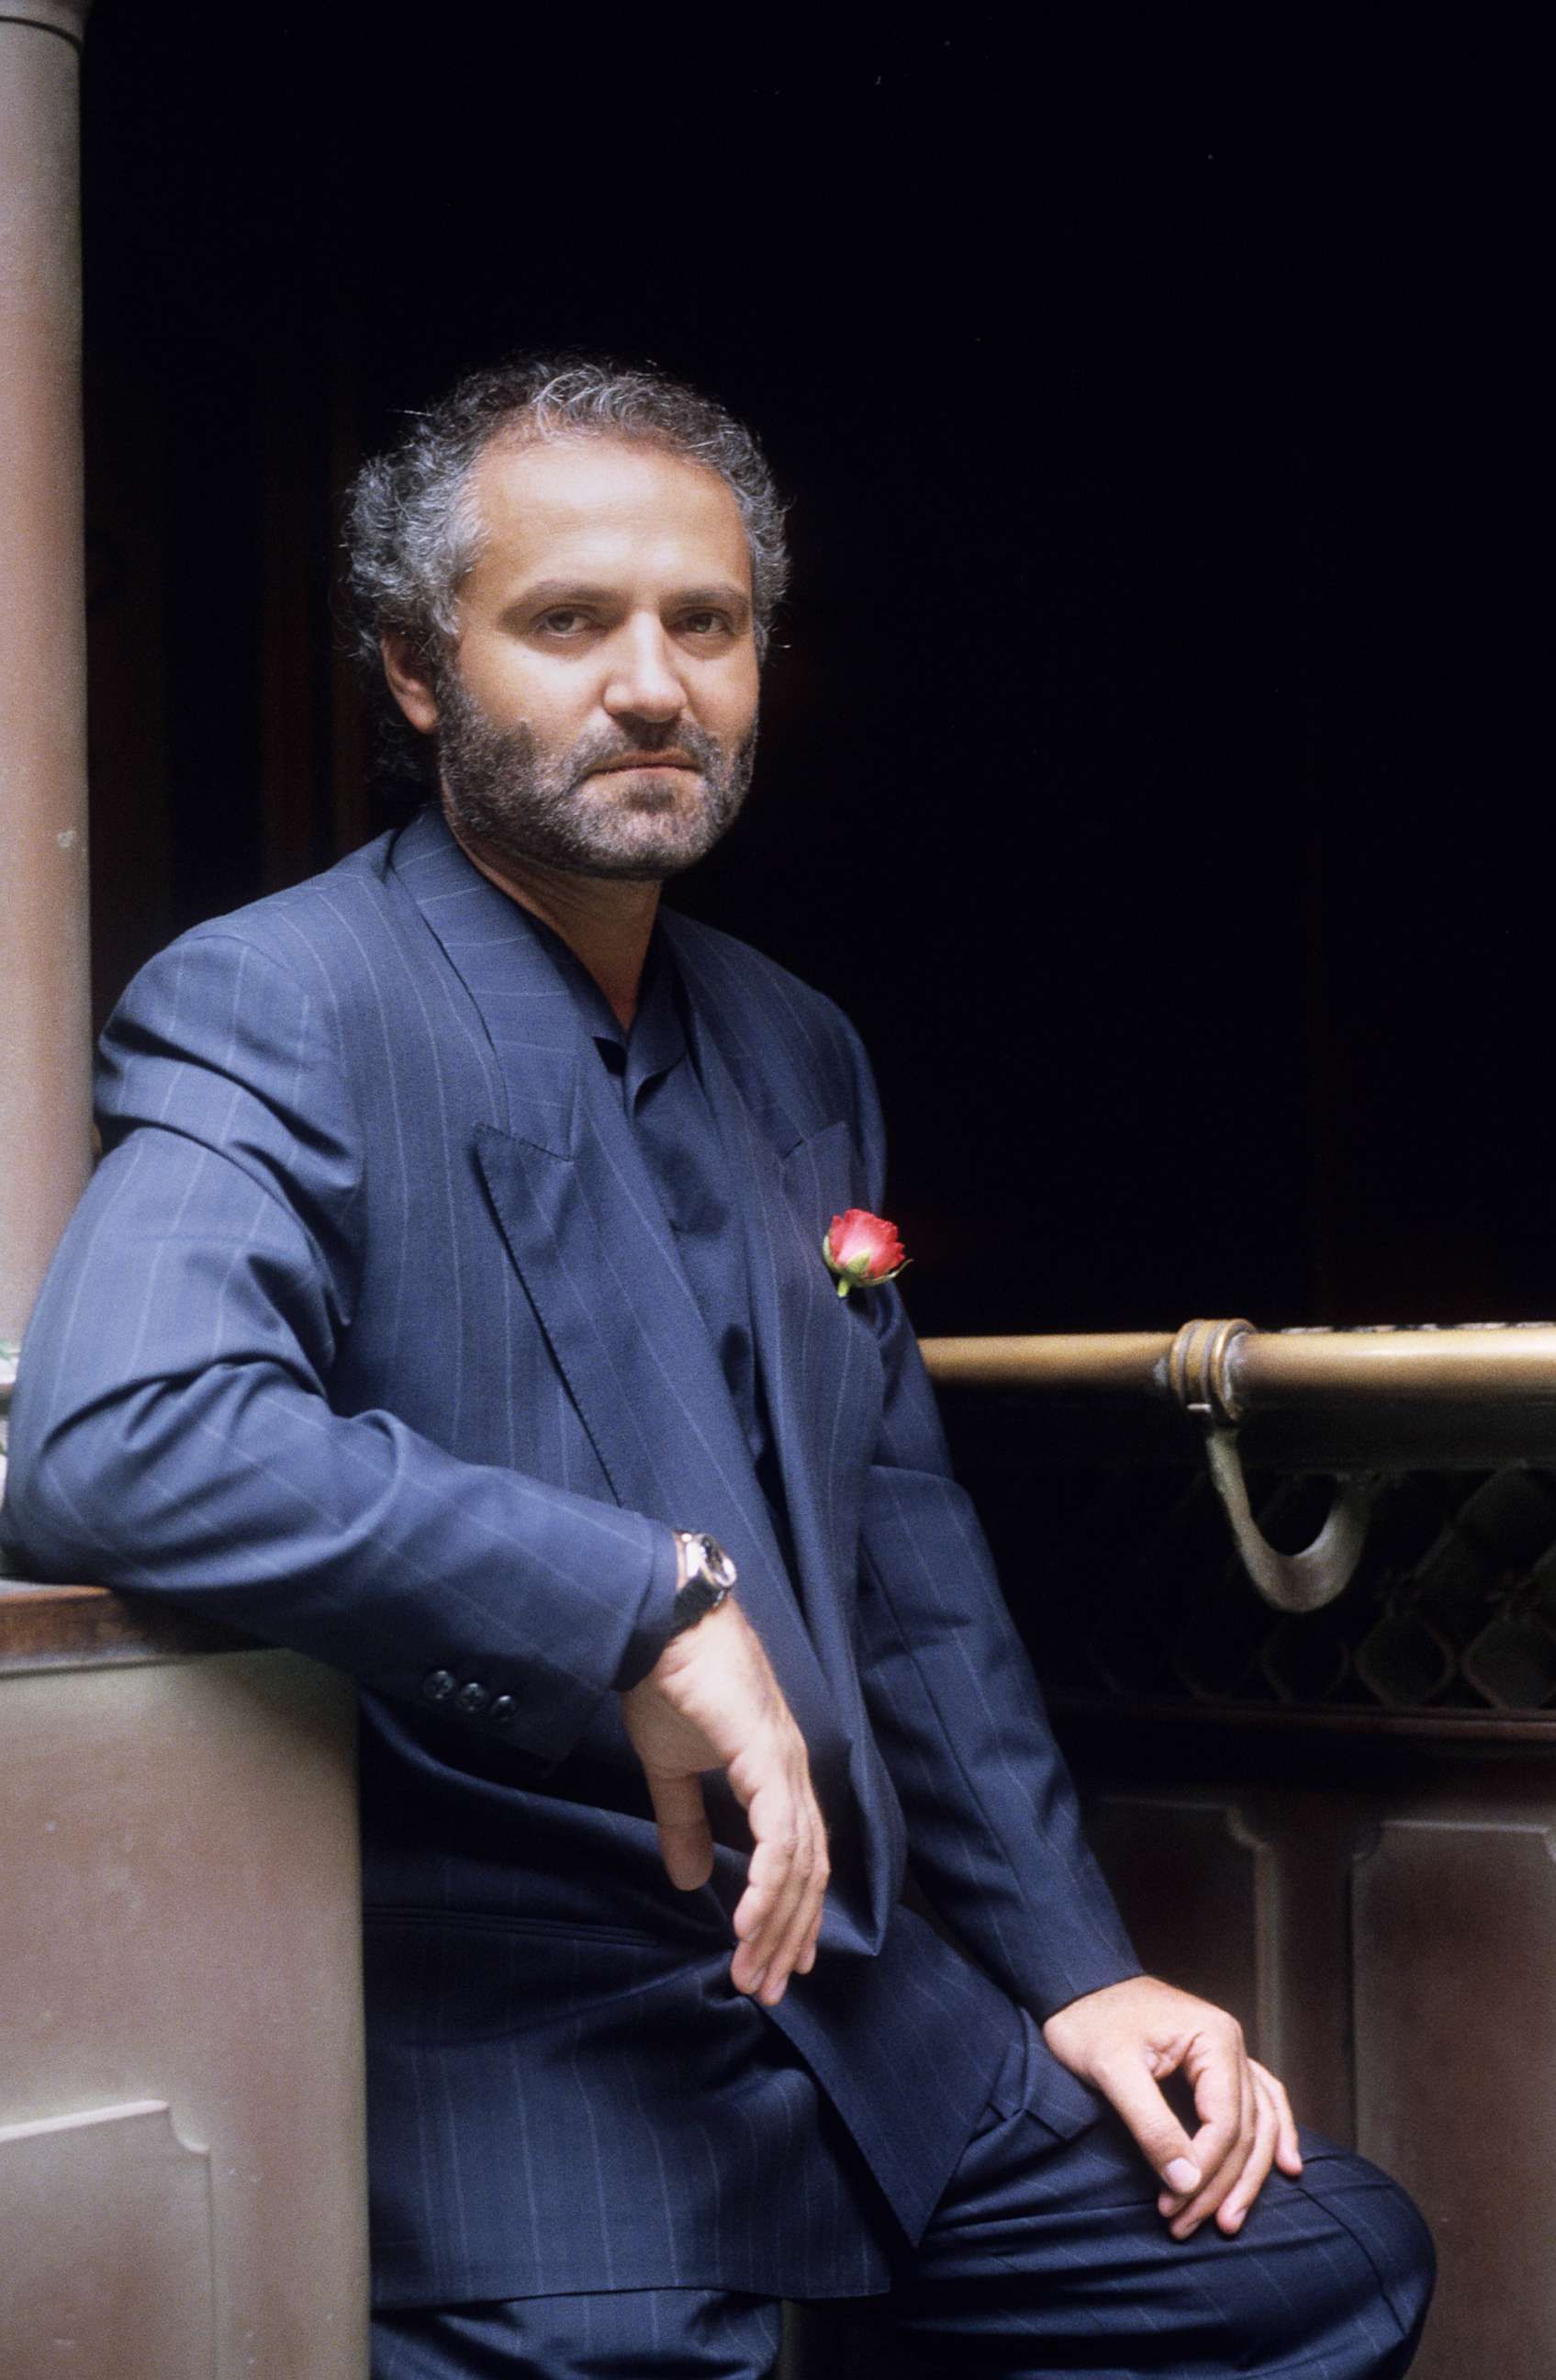 PHOTO: Italian fashion designer and founder of Versace, Gianni Versace, in Rome, May 27, 1985.